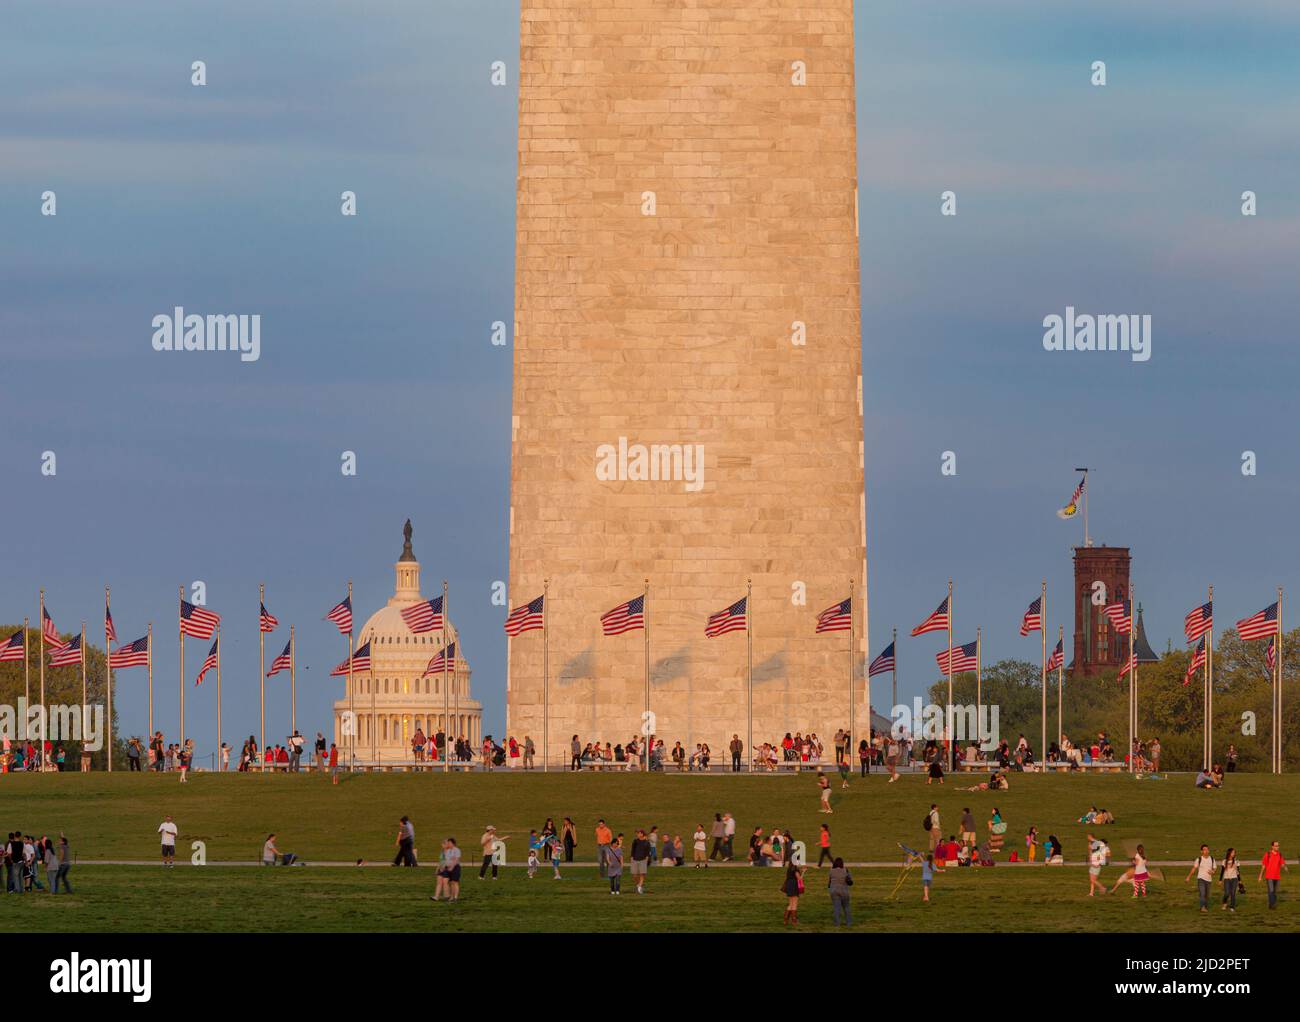 Last rays of sunlight on the Washington Memorial and dome of the US Capitol Building, Washington, DC, USA Stock Photo